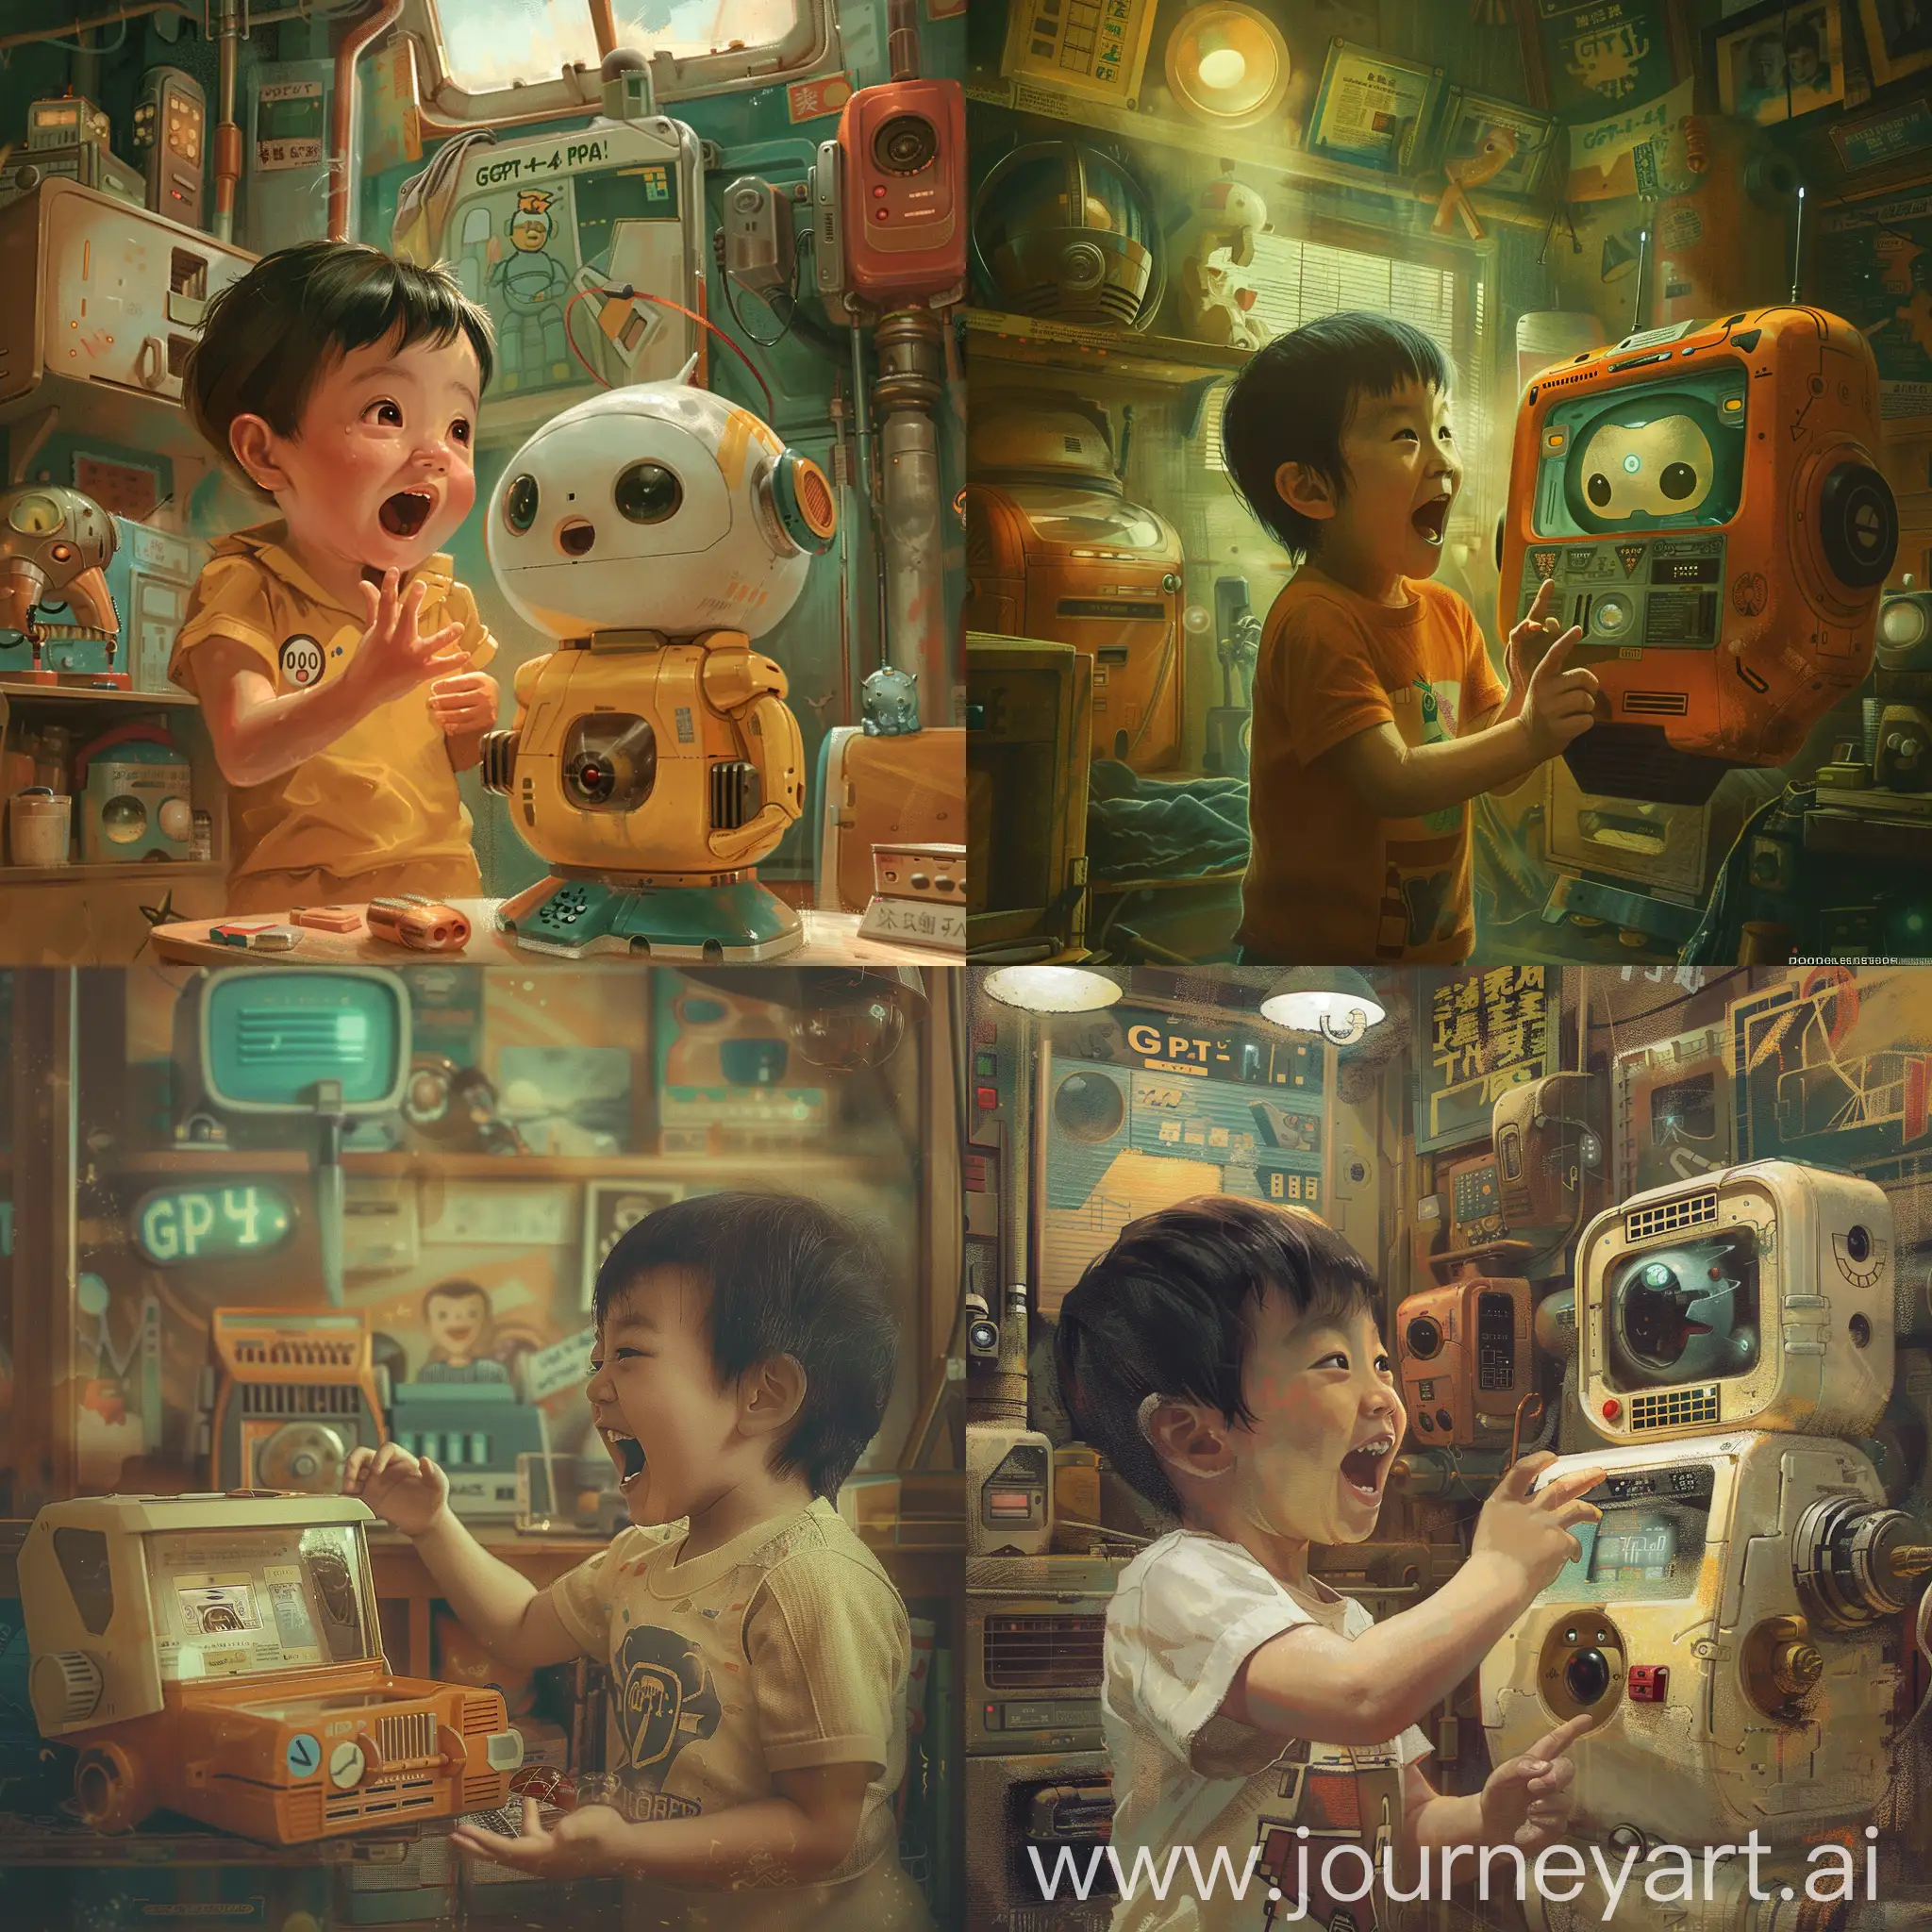 /imagine prompt: "A child excitedly holding a GPT-4 toy, resembling a small robot companion, in a nostalgic, sci-fi setting inspired by Doraemon manga. The scene shows the child attempting to communicate with the toy, which responds in simple, direct ways. The child's expression is a mix of curiosity and anticipation. The room is filled with vintage sci-fi decor, blending the old with the new." Created Using: detailed ink lines, vibrant colors, expressive characters, dynamic angles, soft shading, emotional facial expressions, vintage sci-fi elements, manga style, hd quality, natural look --ar 1:1 --v 6.0